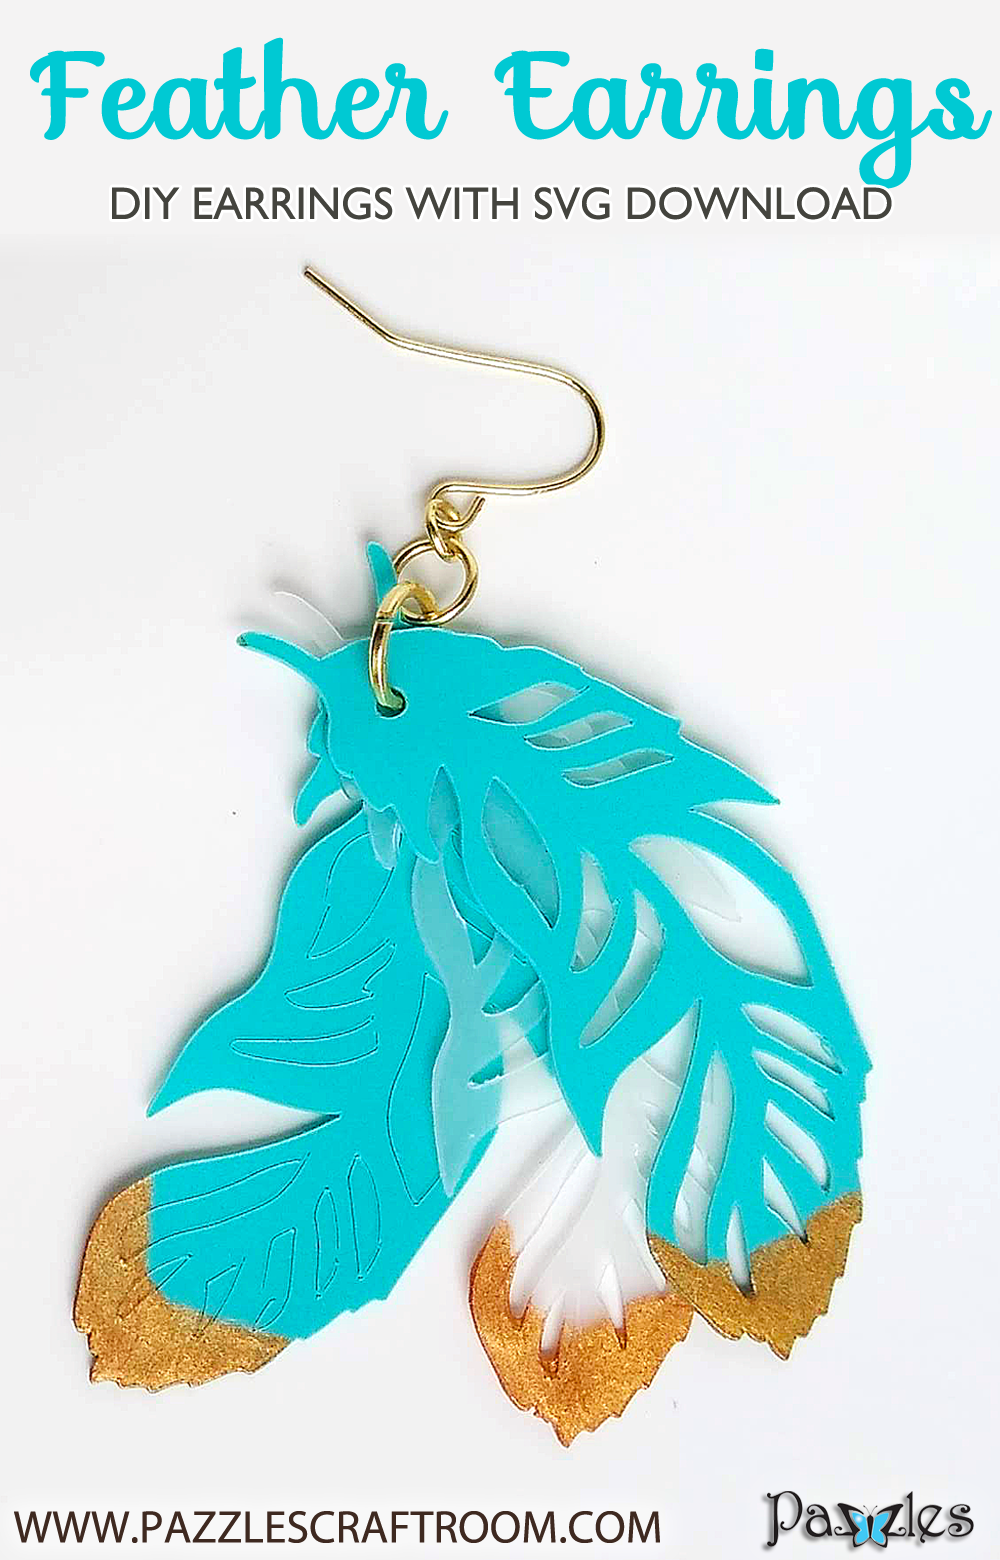 feather-earrings-pinterest.png